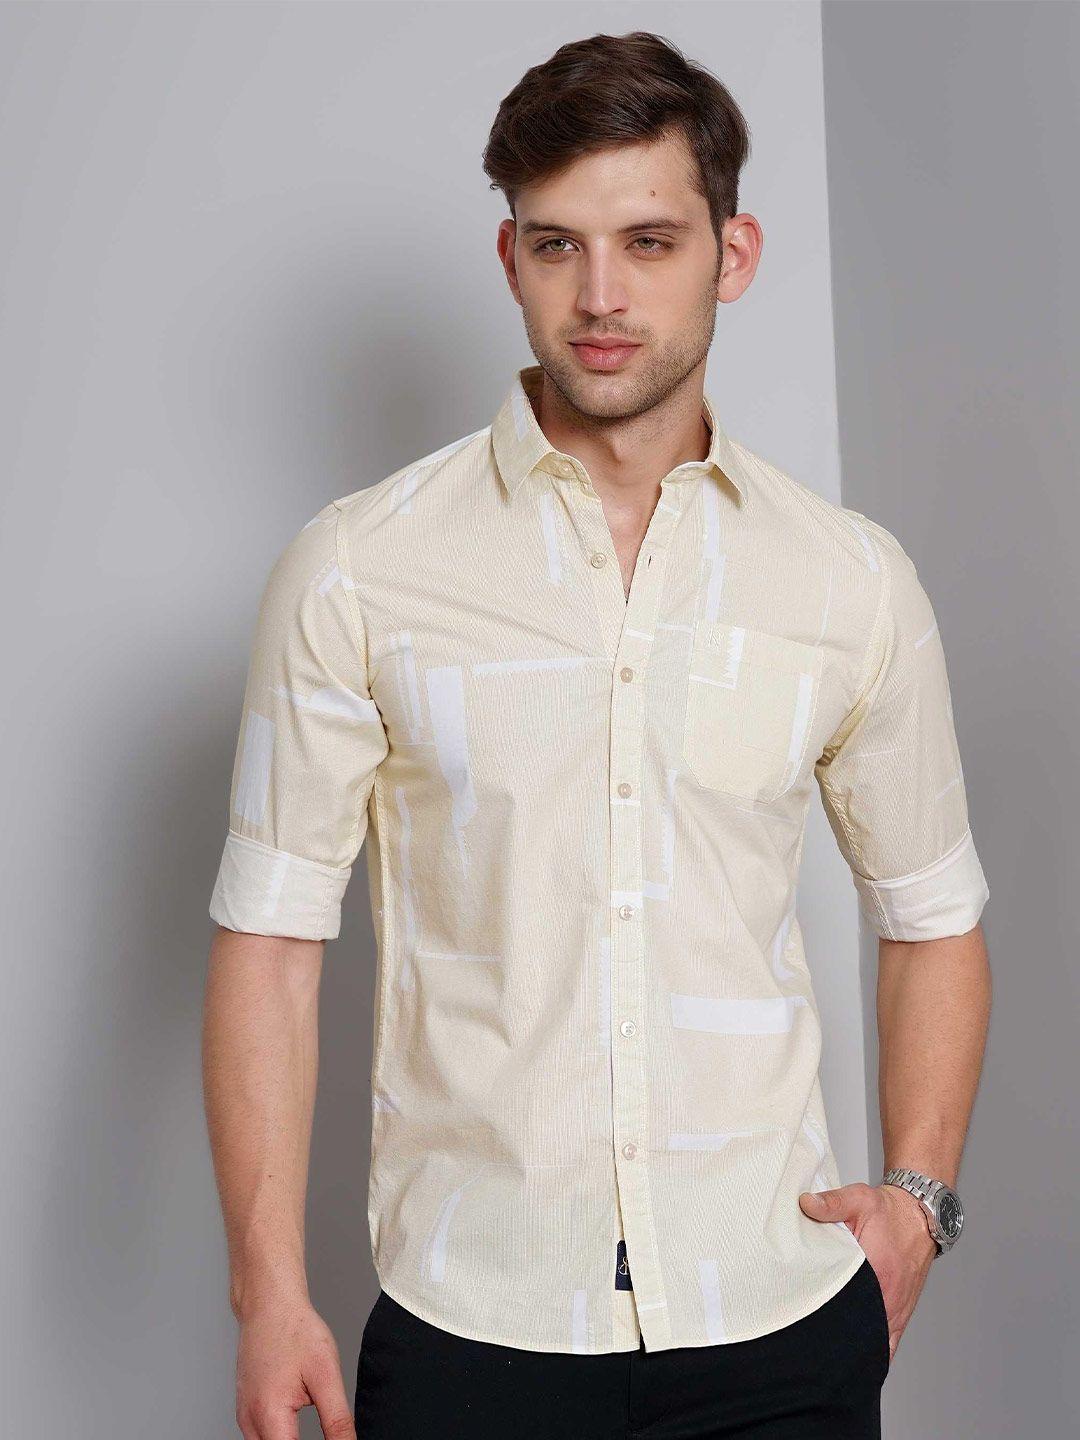 soratia slim fit opaque abstract printed cotton casual shirt